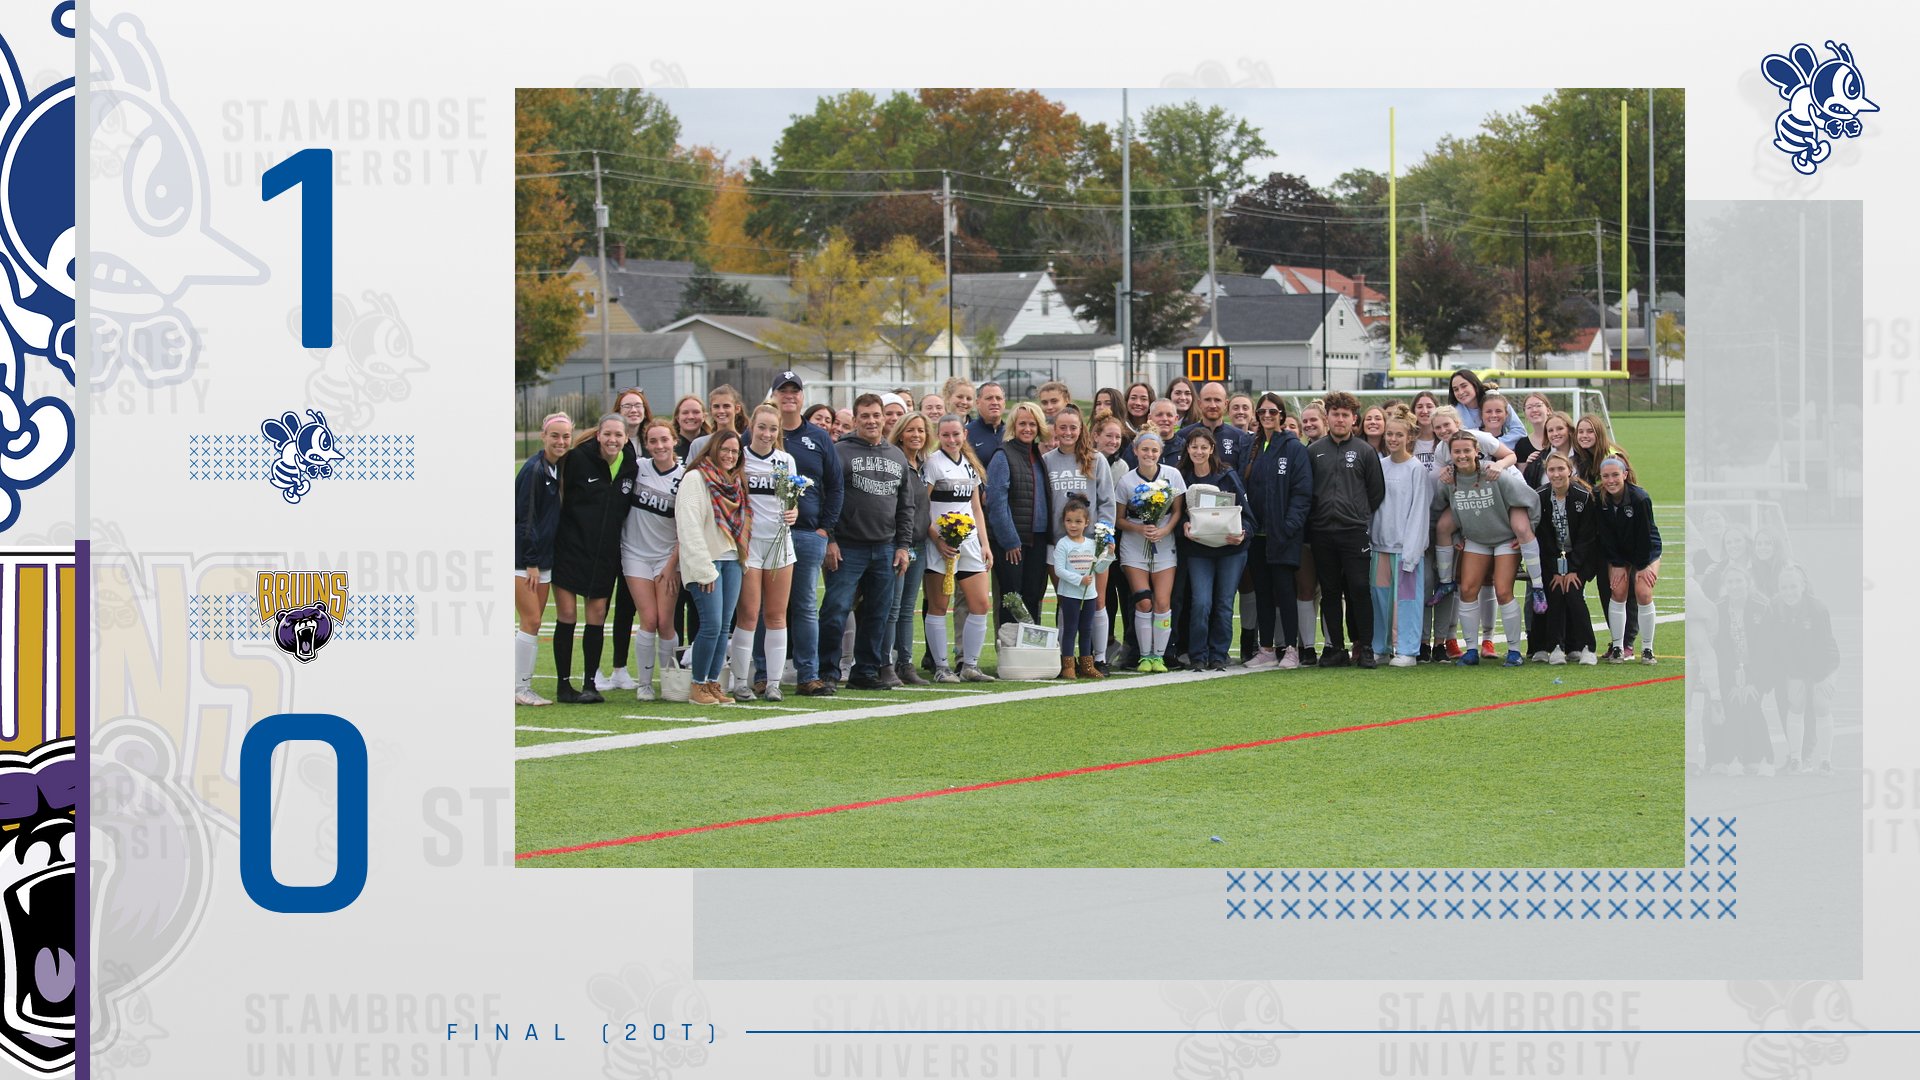 Bees beat Bruins on Senior Day